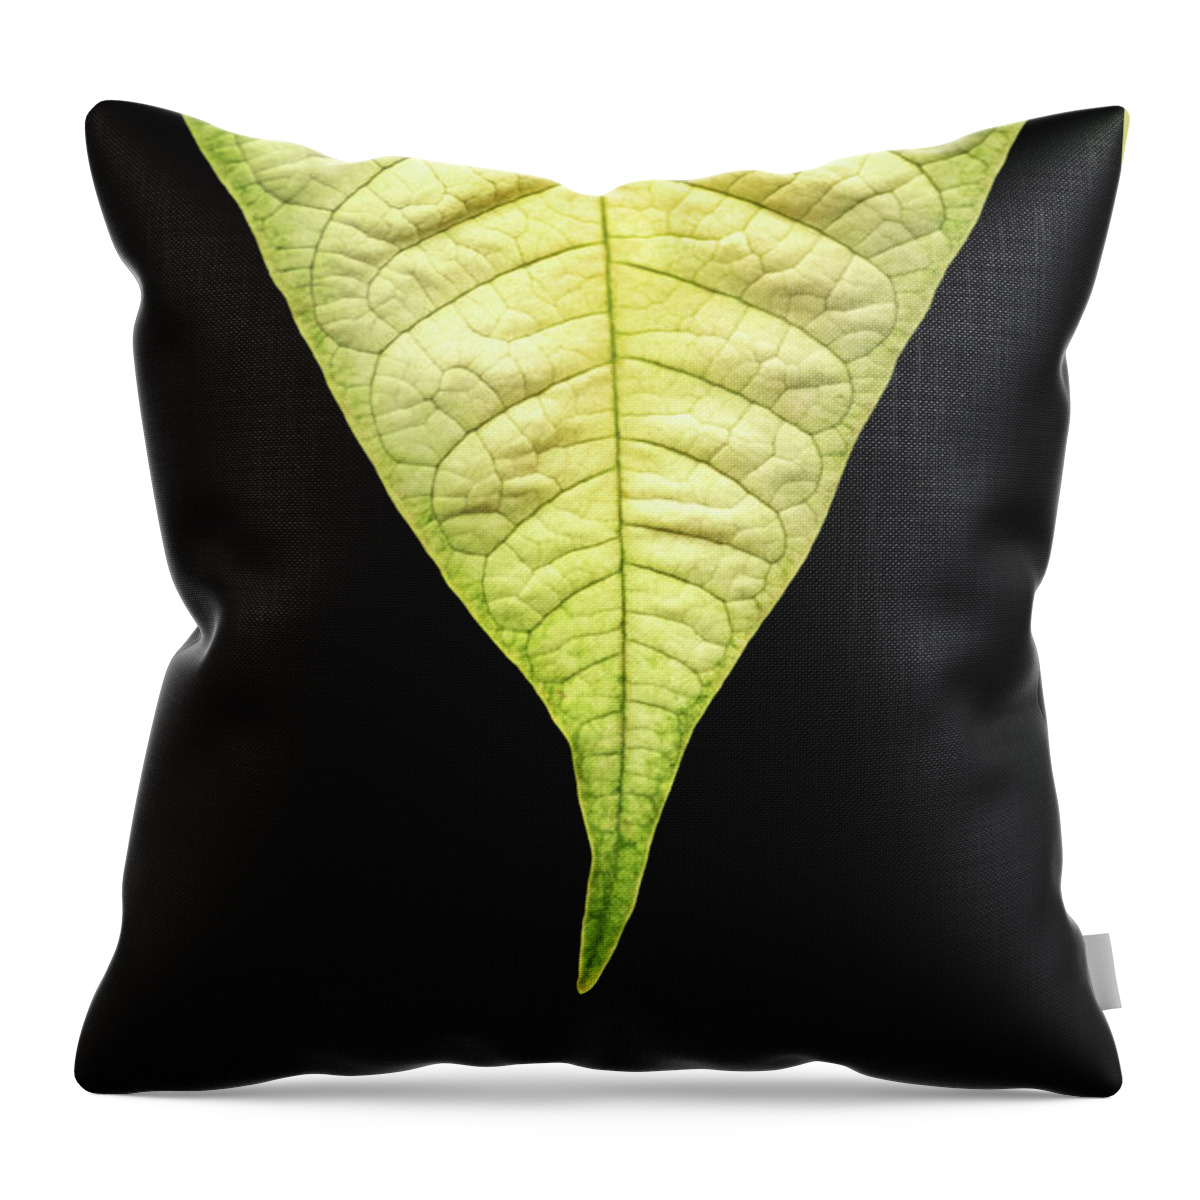 Flower Throw Pillow featuring the photograph White Poinsettia Leaf by Don Johnson